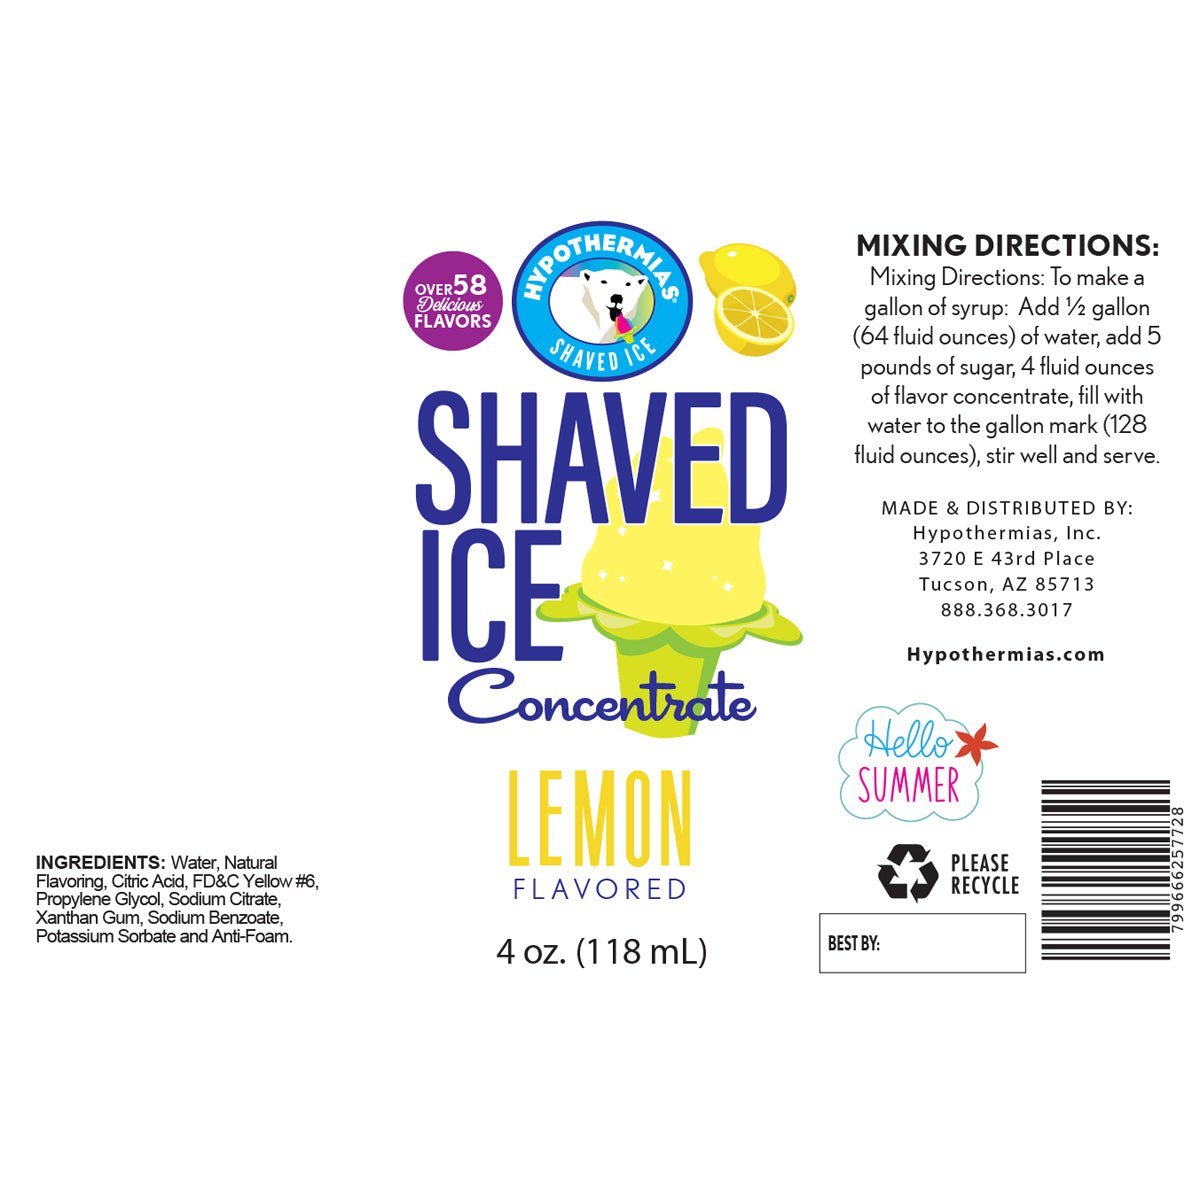 Hypothermias lemon shaved ice or snow cone flavor syrup concentrate ingredient label. 